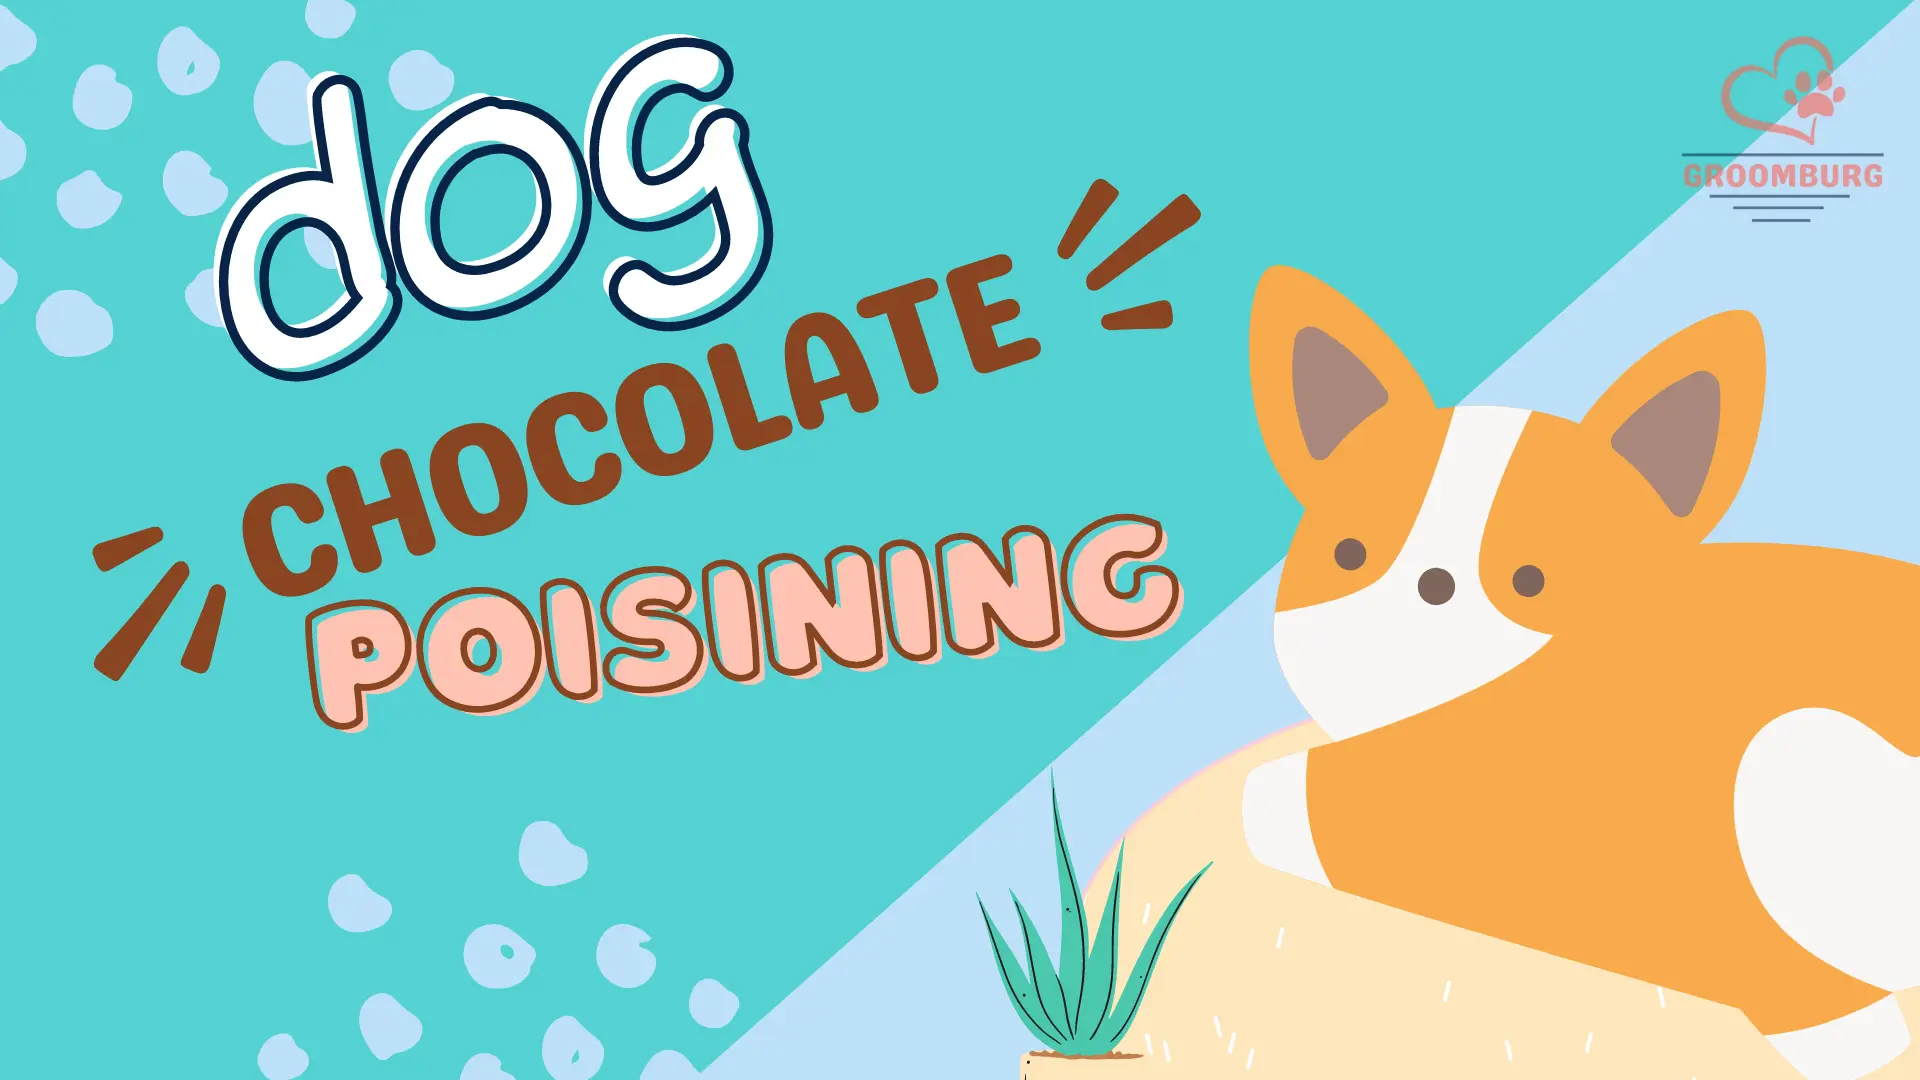 Dog Chocolate Poisoning Timeline – What to Do?